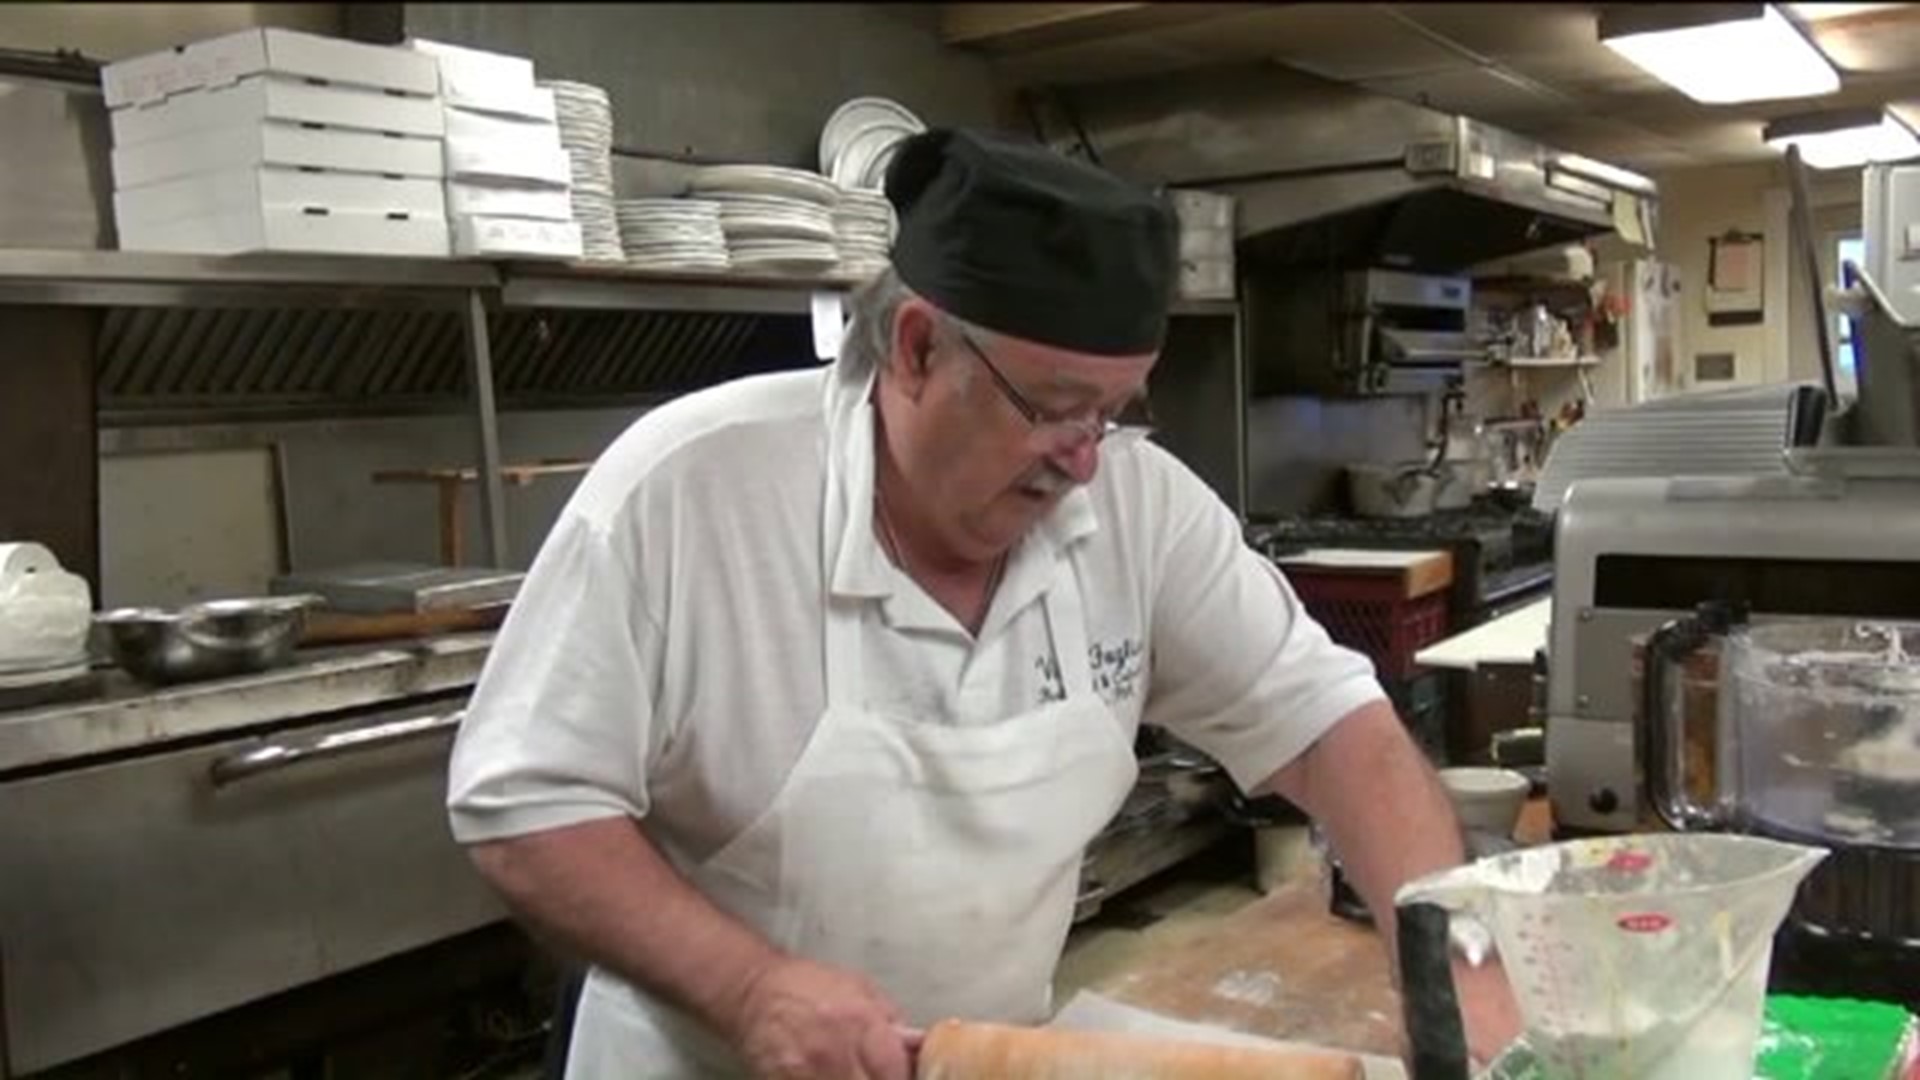 Longtime Luzerne County Restaurant up for Sale